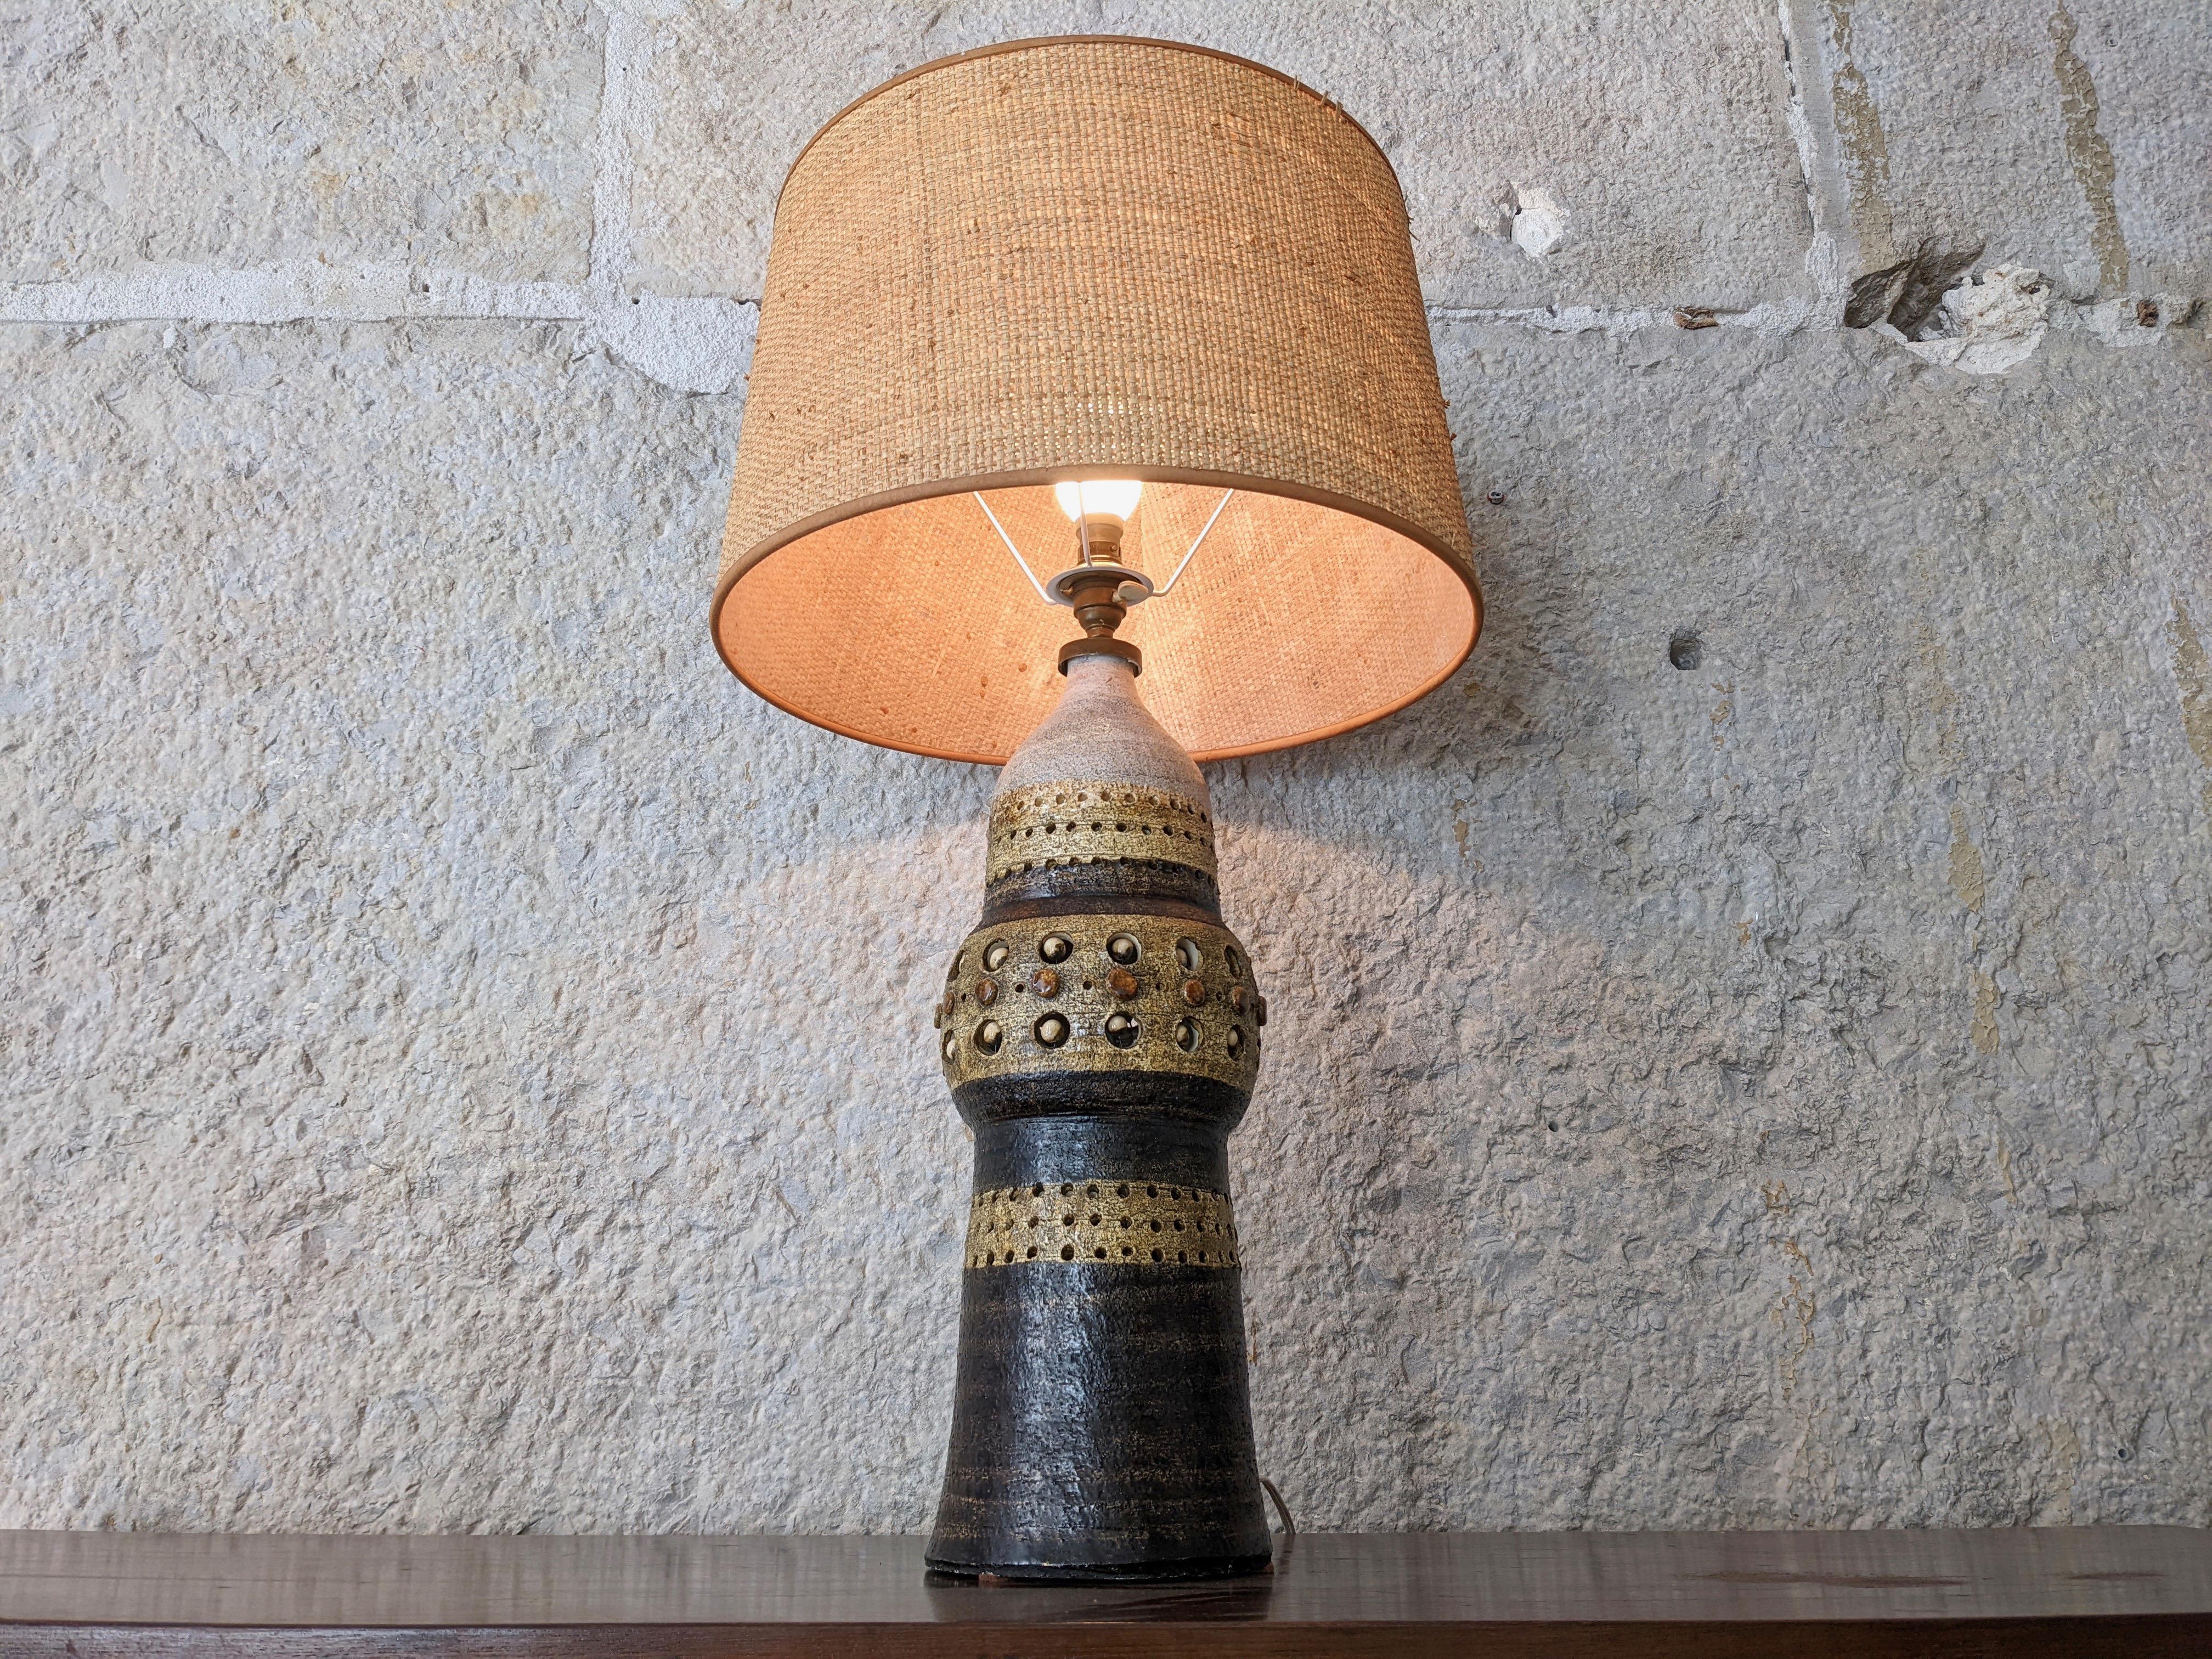 Ceramic lamp by Georges Pelletier. Very good condition. Circa 1960. The lampshade is not original. 
Dimensions : H69,5 cm x D35 cm (with shade).